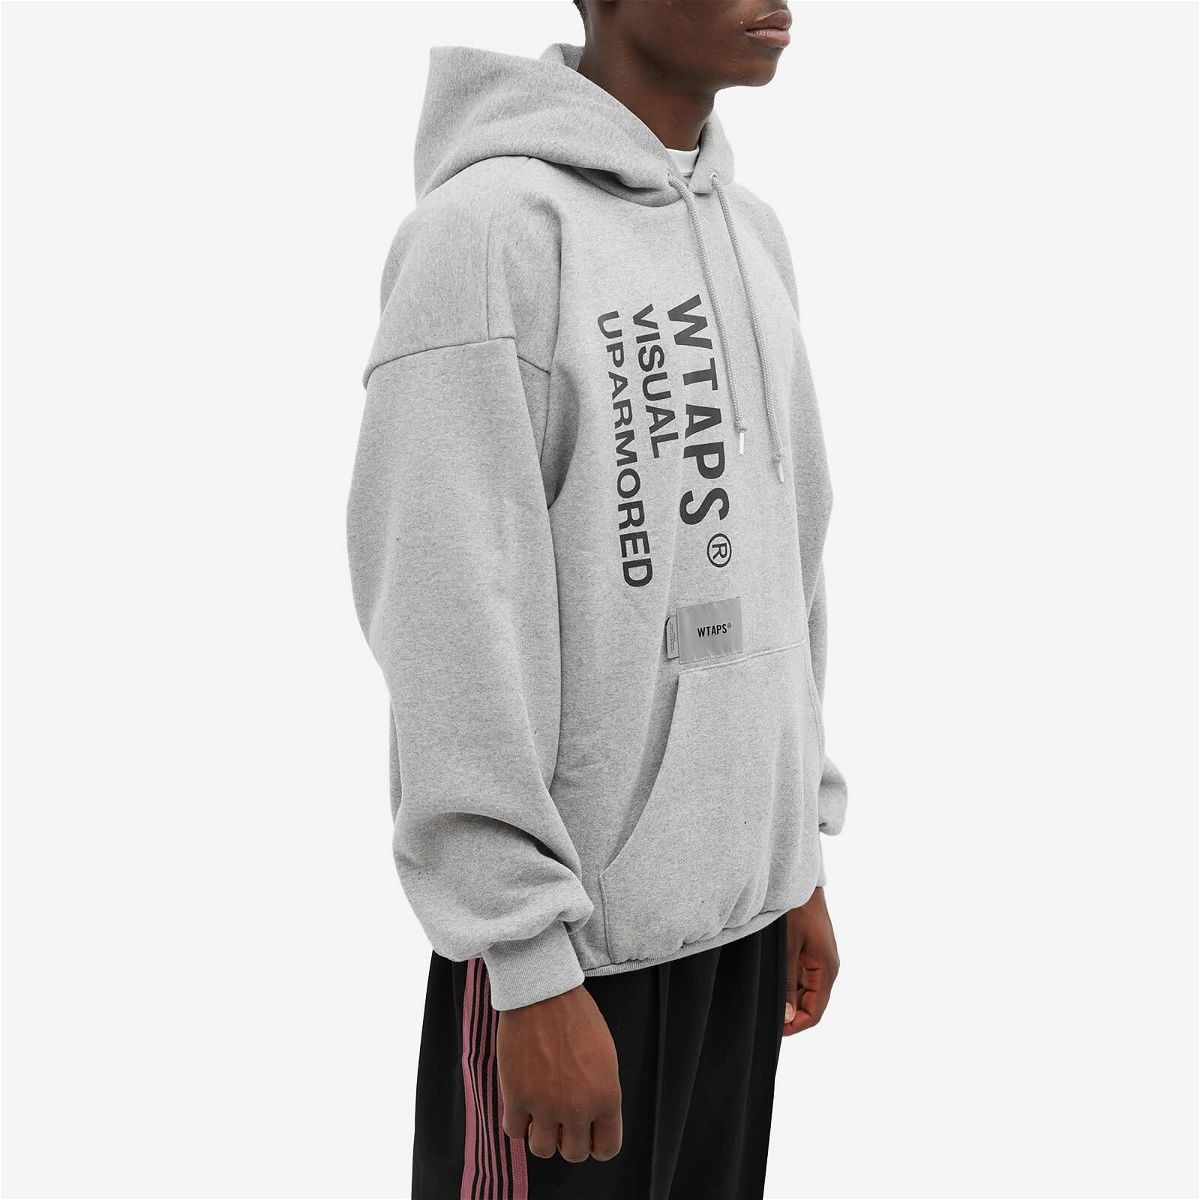 WTAPS VISUAL UPARMORED HOODY ASH GRAY S - トップス